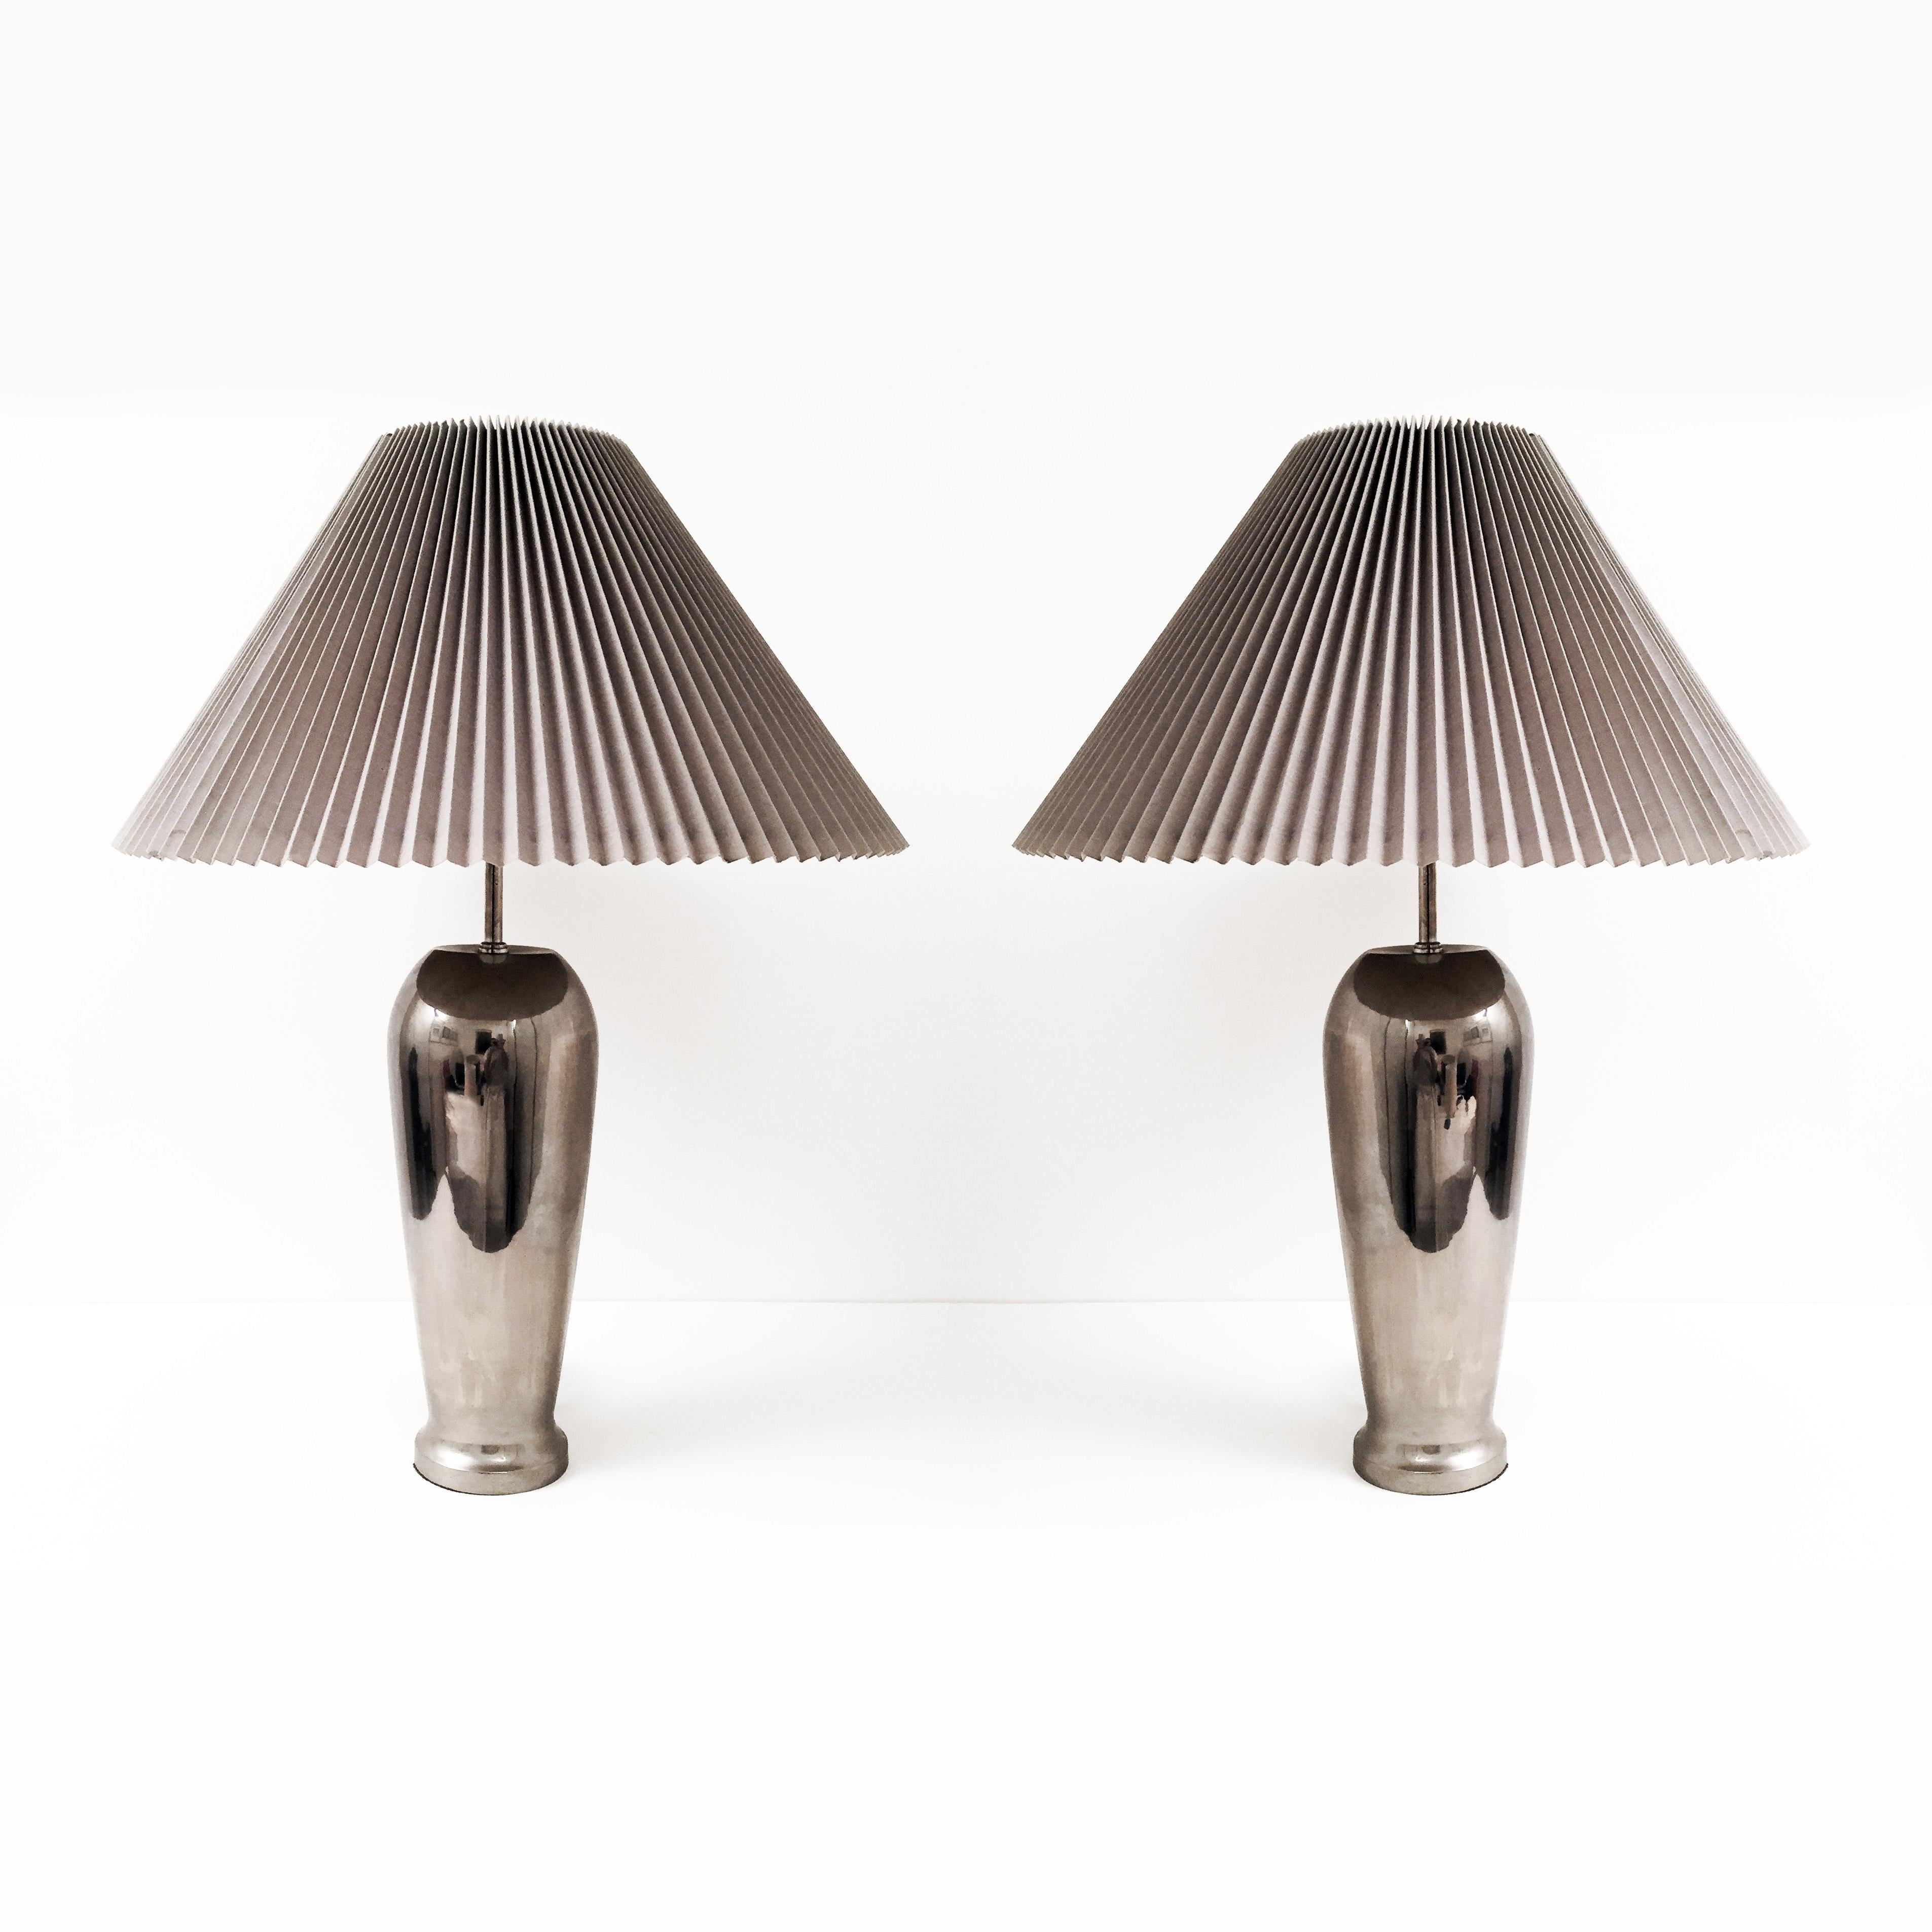 A unique pair of chrome table lamps in the shape of elongated urns and tall neck fitting for the lamp with the original knife pleat hardback shades. Very modern and elegant design brought from the 1980s glamour.